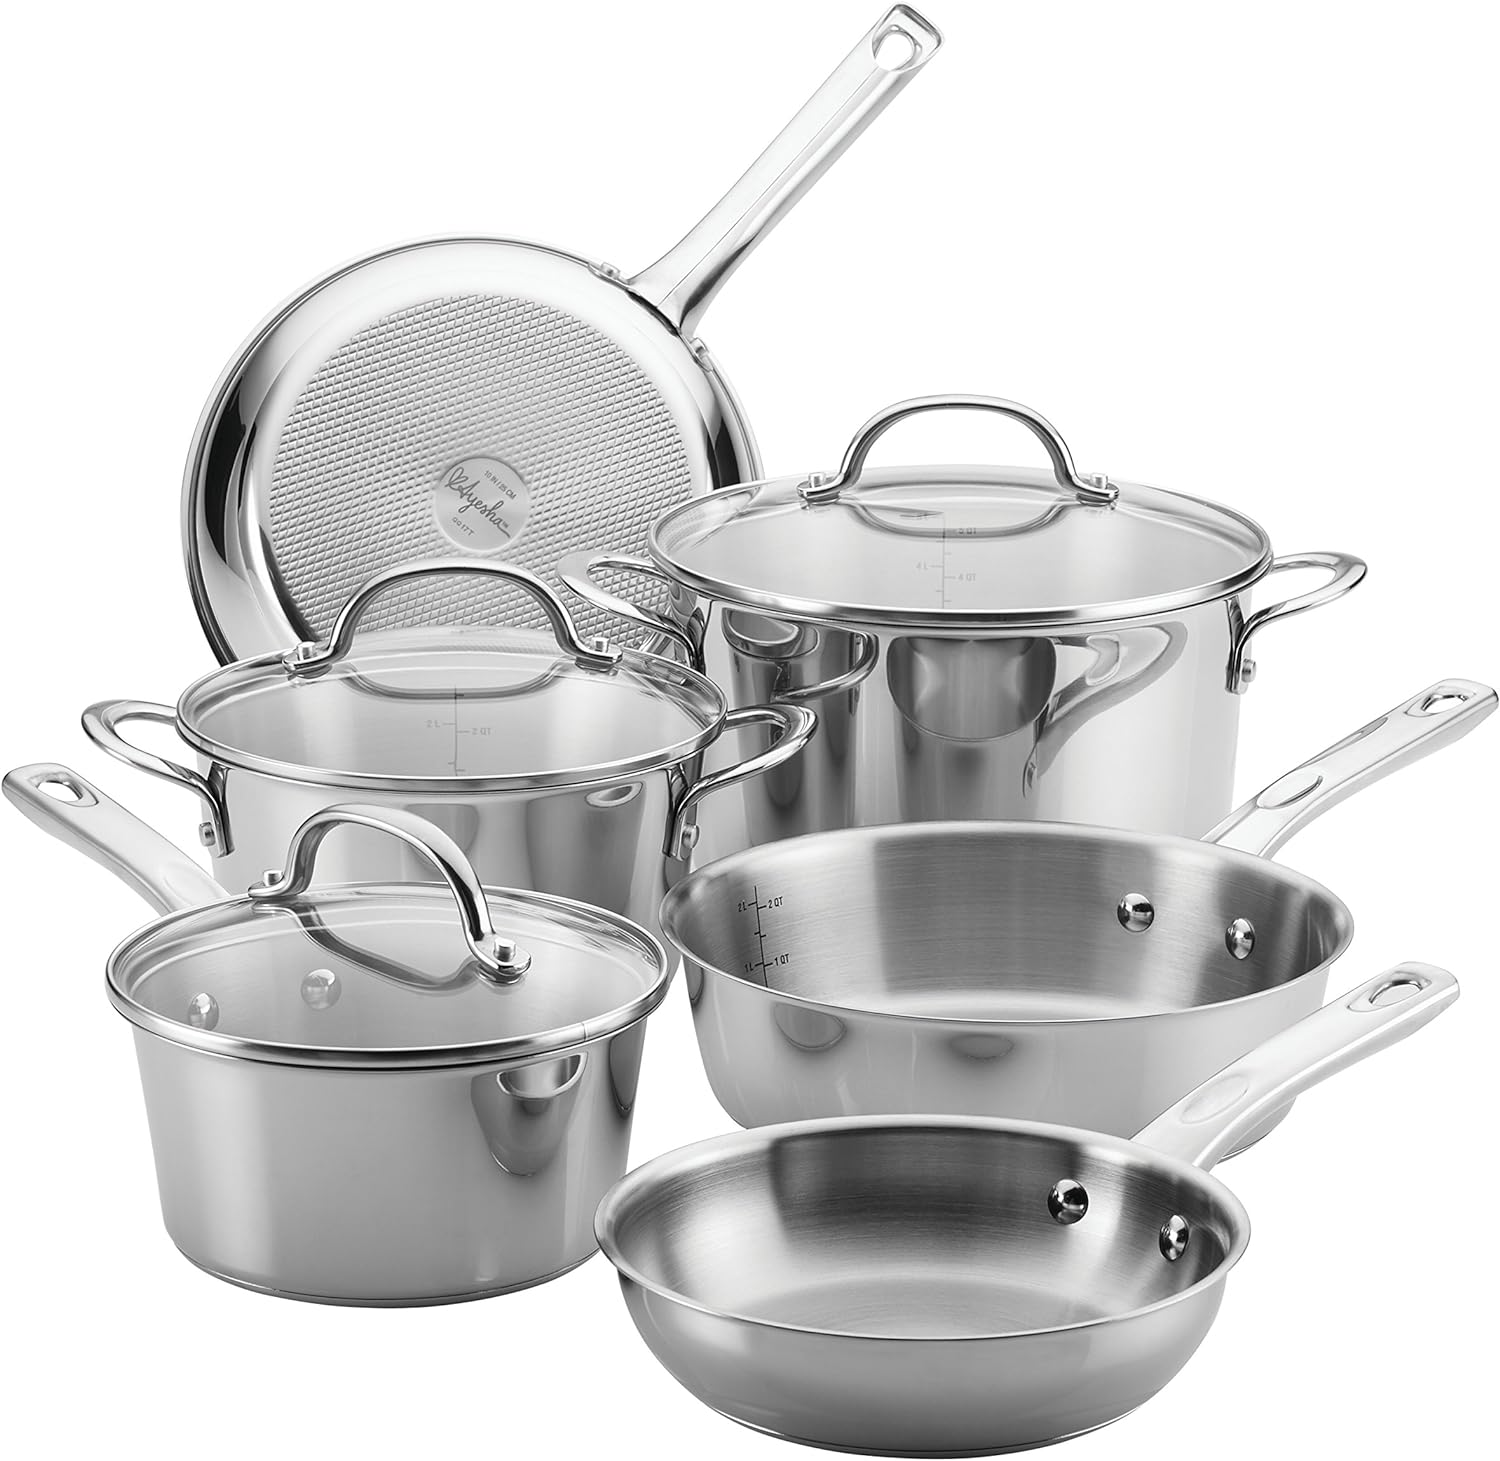 Ayesha Curry Home Collection Stainless Steel Cookware Pots and Pans Set